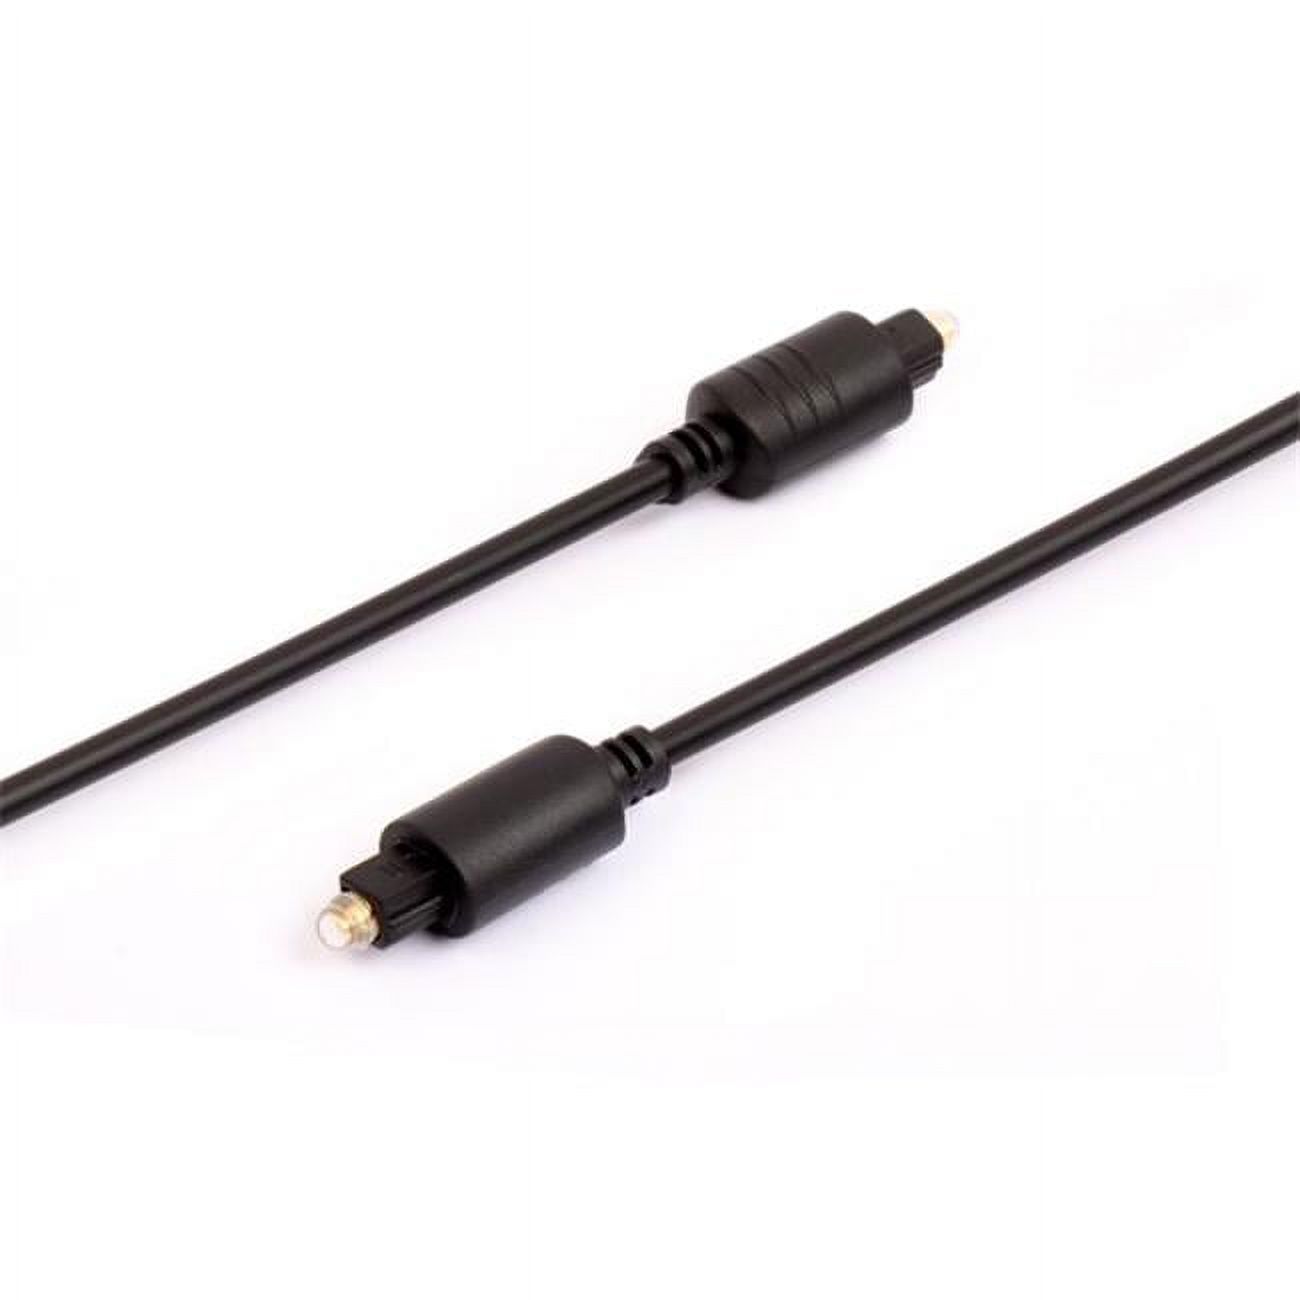 Onn Toslink, 6' Digital Audio Optical Cable - image 1 of 2